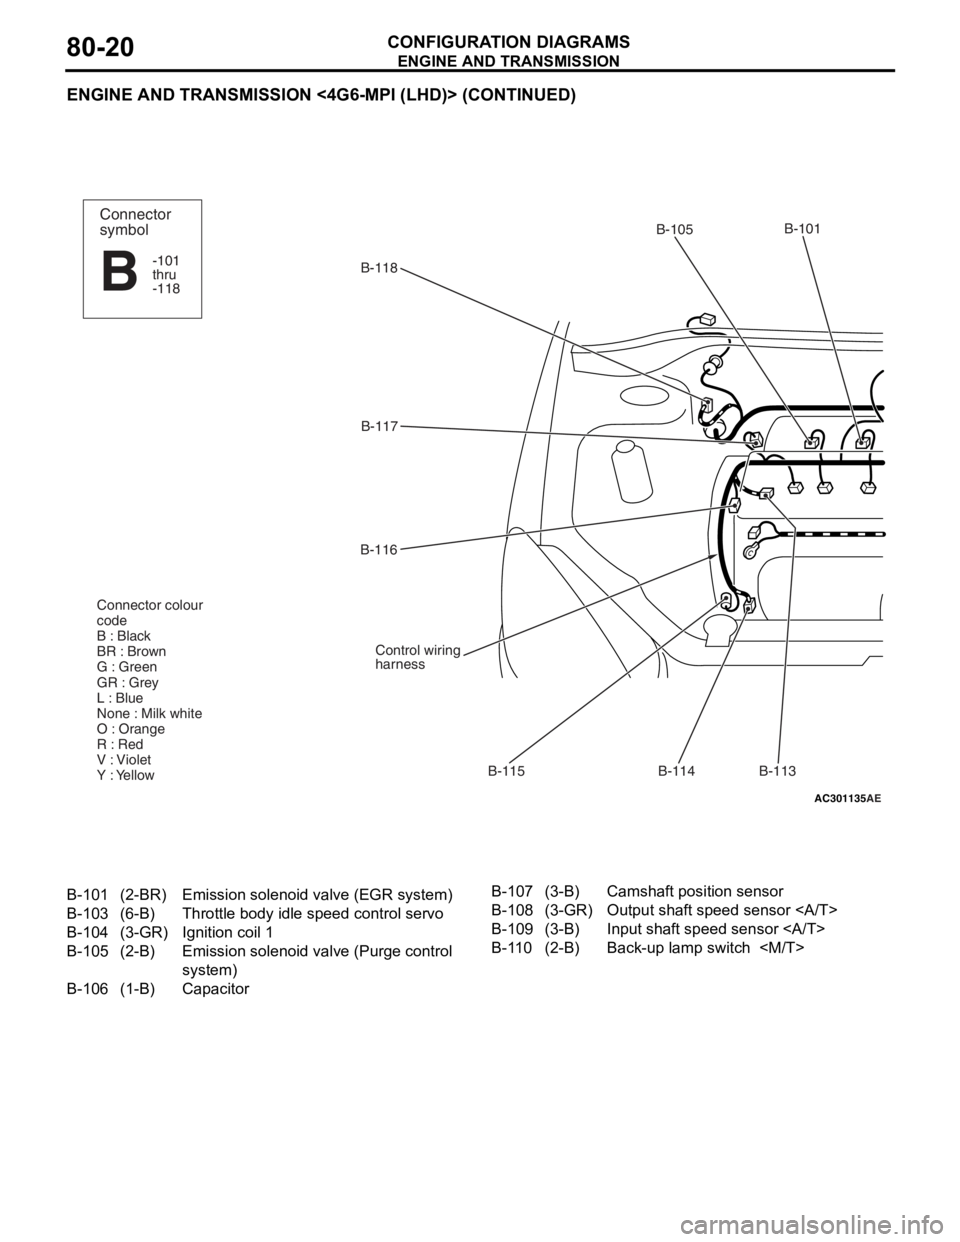 MITSUBISHI LANCER IX 2006  Service Manual 
ENGINE AND TRANSMISSION
CONFIGURATION DIAGRAMS80-20
ENGINE AND TRANSMISSION <4G6-MPI (LHD)> (CONTINUED)
AC301135AE
B-118B-101
B-114
B-115
B-116
B-117
Control wiring
harness
Connector colour
code
B : 